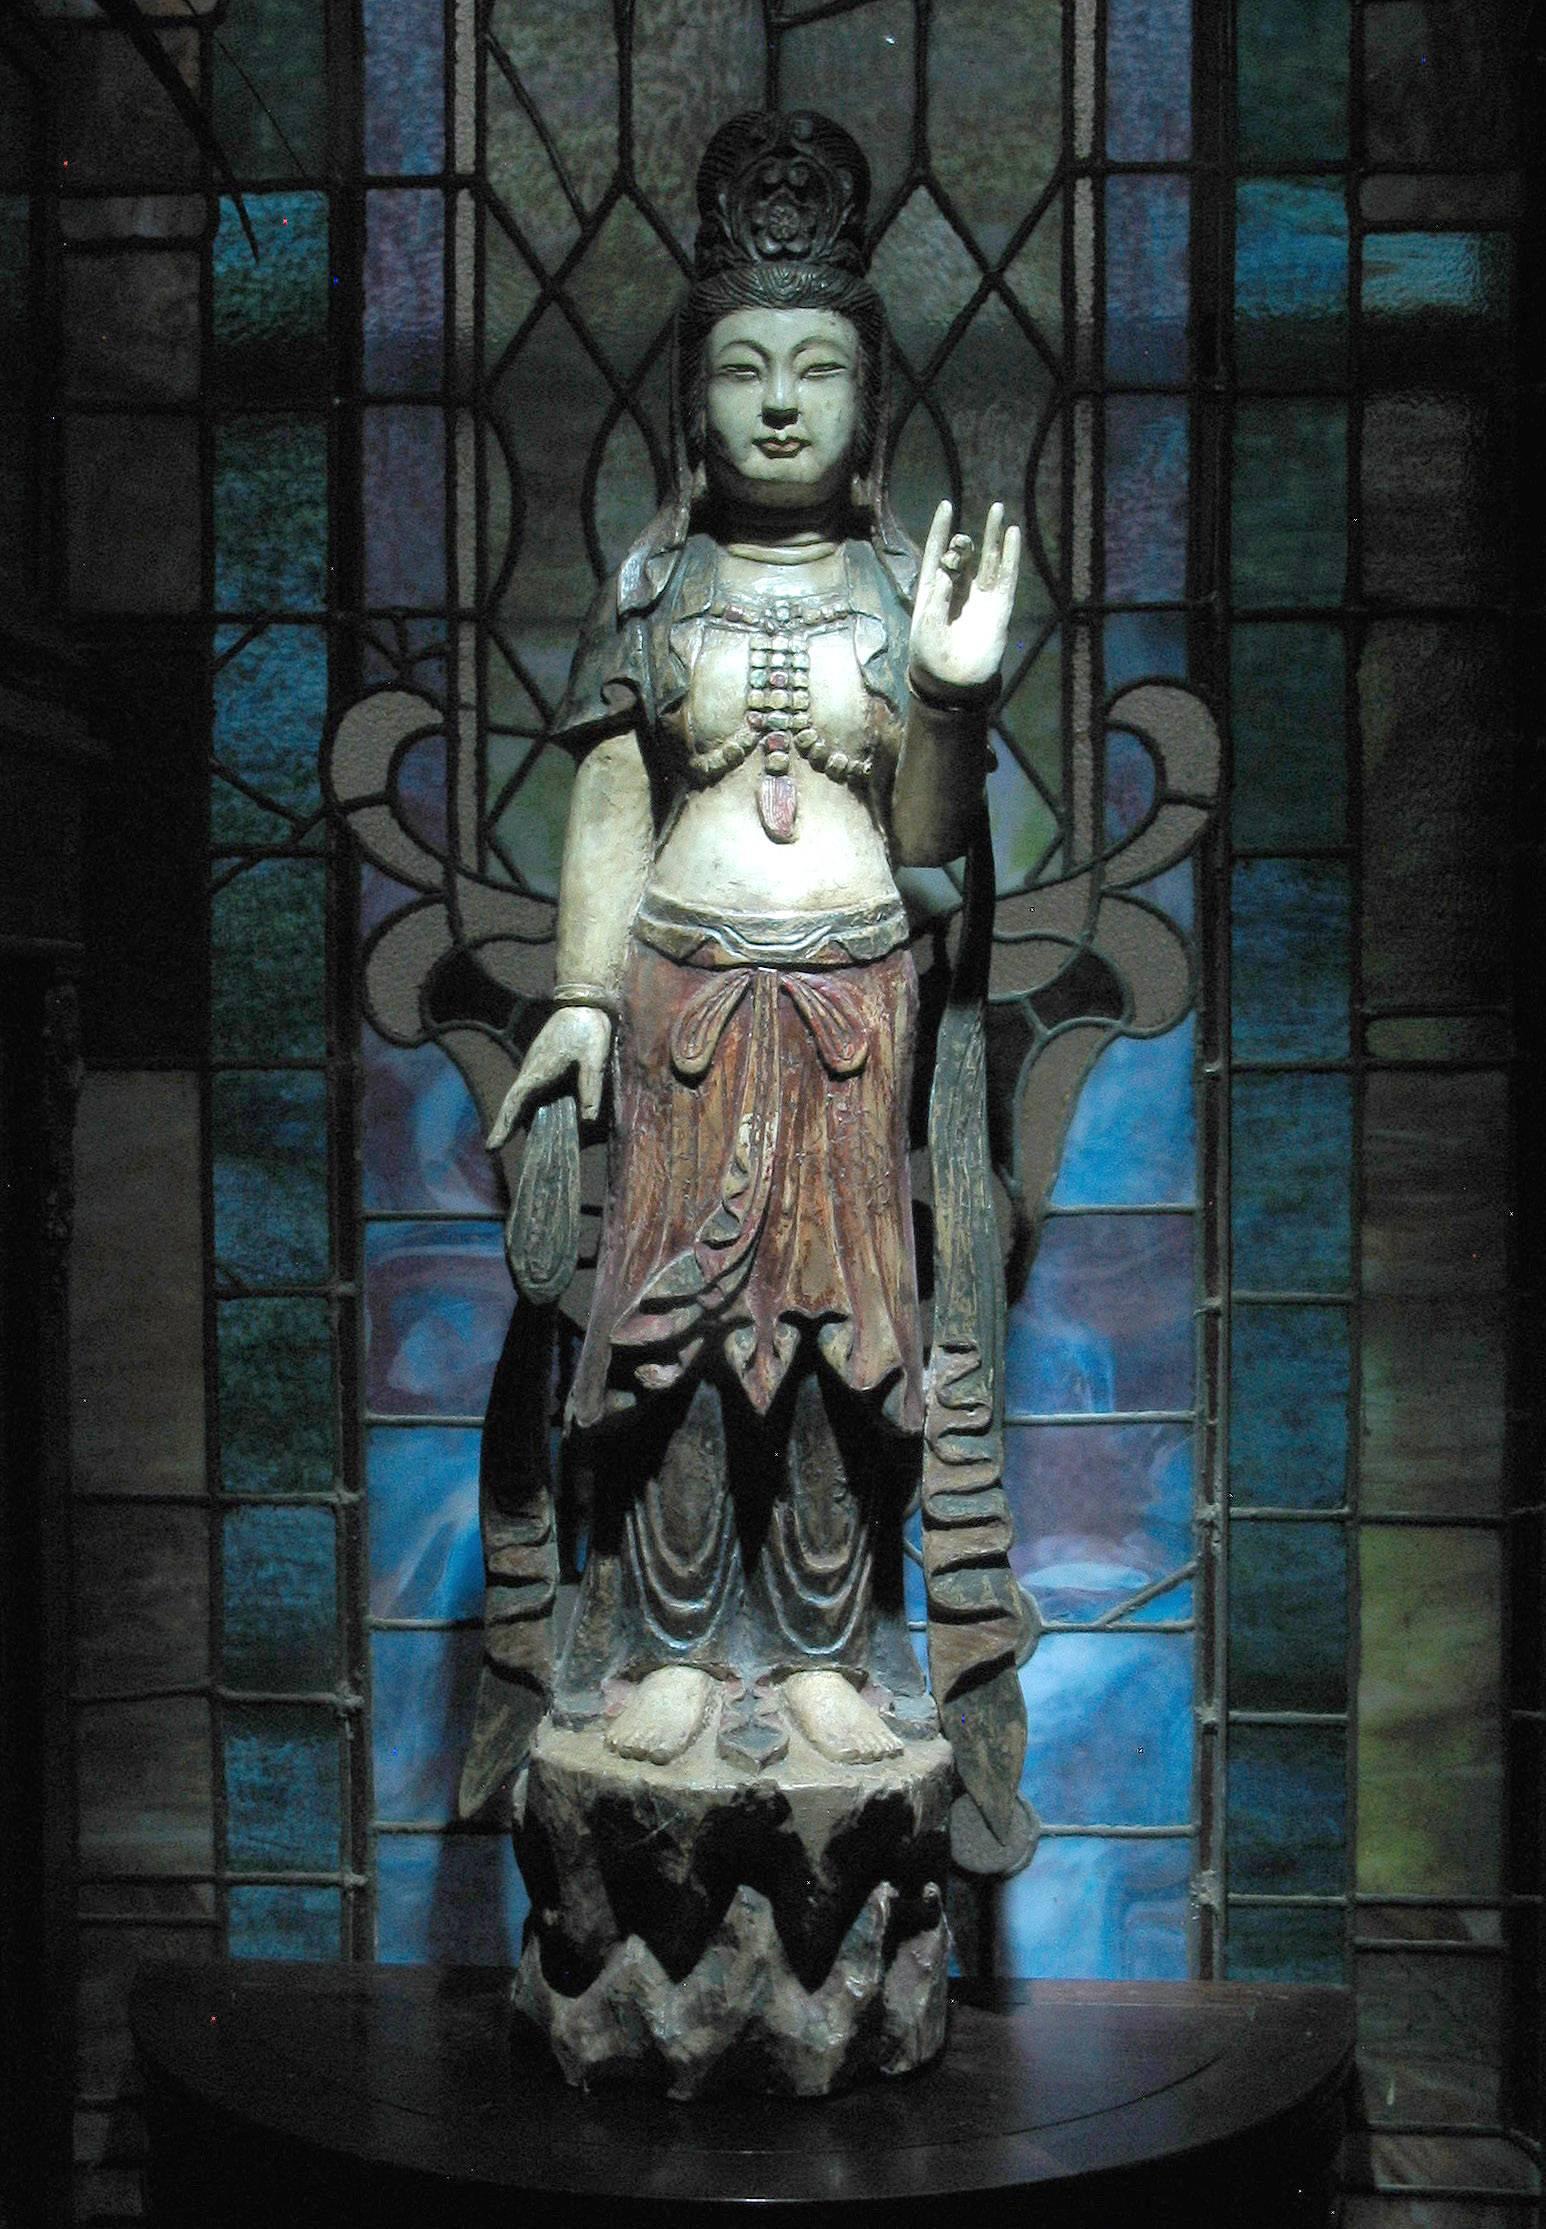 A Chinese carved wood standing figure of Guanyin in the Ming dynasty style, with polychrome application, the hair tied back into an elaborate high chignon, with her left hand raised, holding a pearl and standing on a rock base.
Late Qing dynasty,